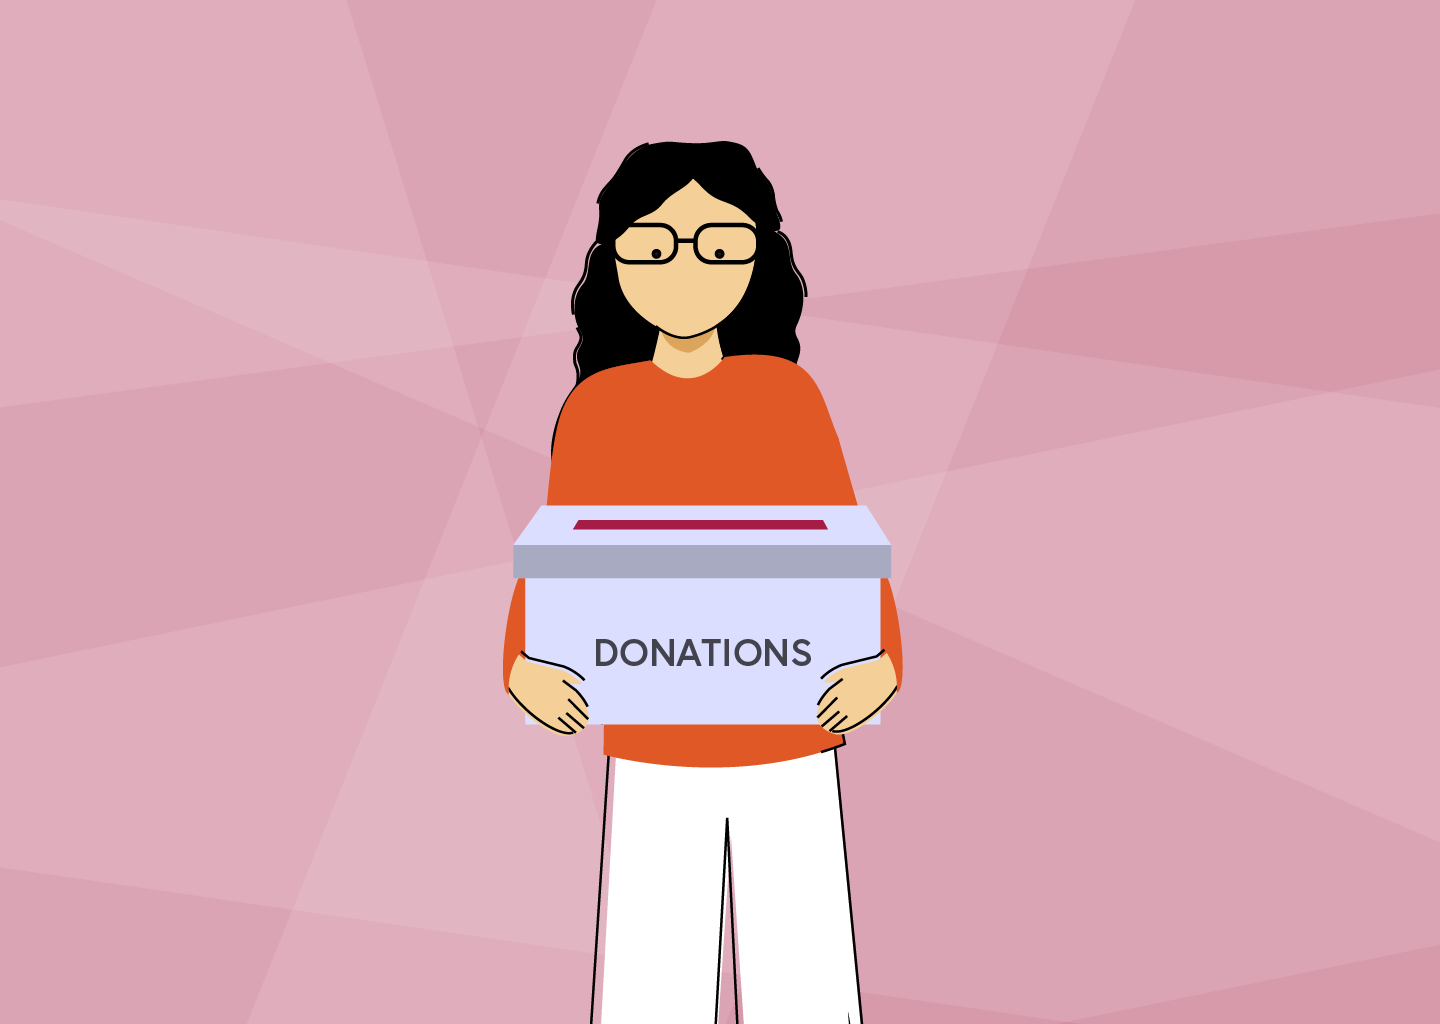 How to Ask for Donations: A Guide For Individuals Who Are Raising Money